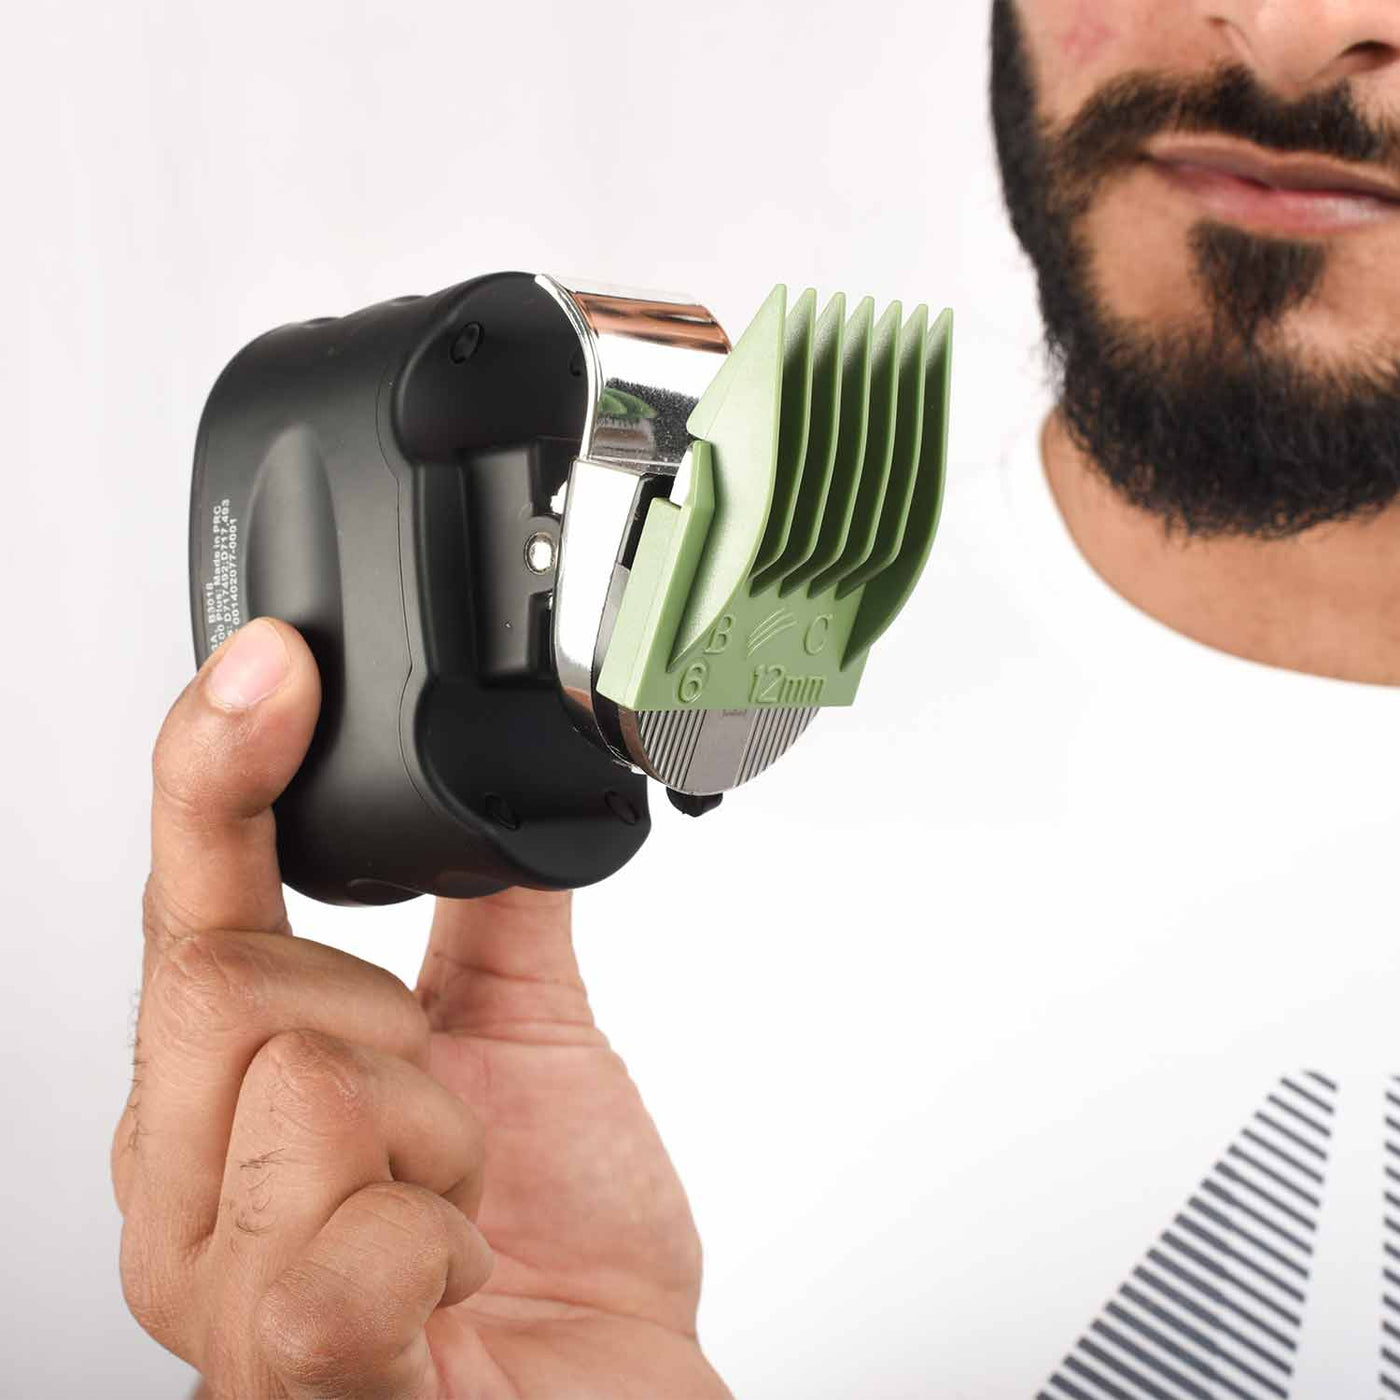 the beast clipper PRO can also be gripped by the handle to give you flexibility. combs slide on and off the blades and click into place when fully installed.